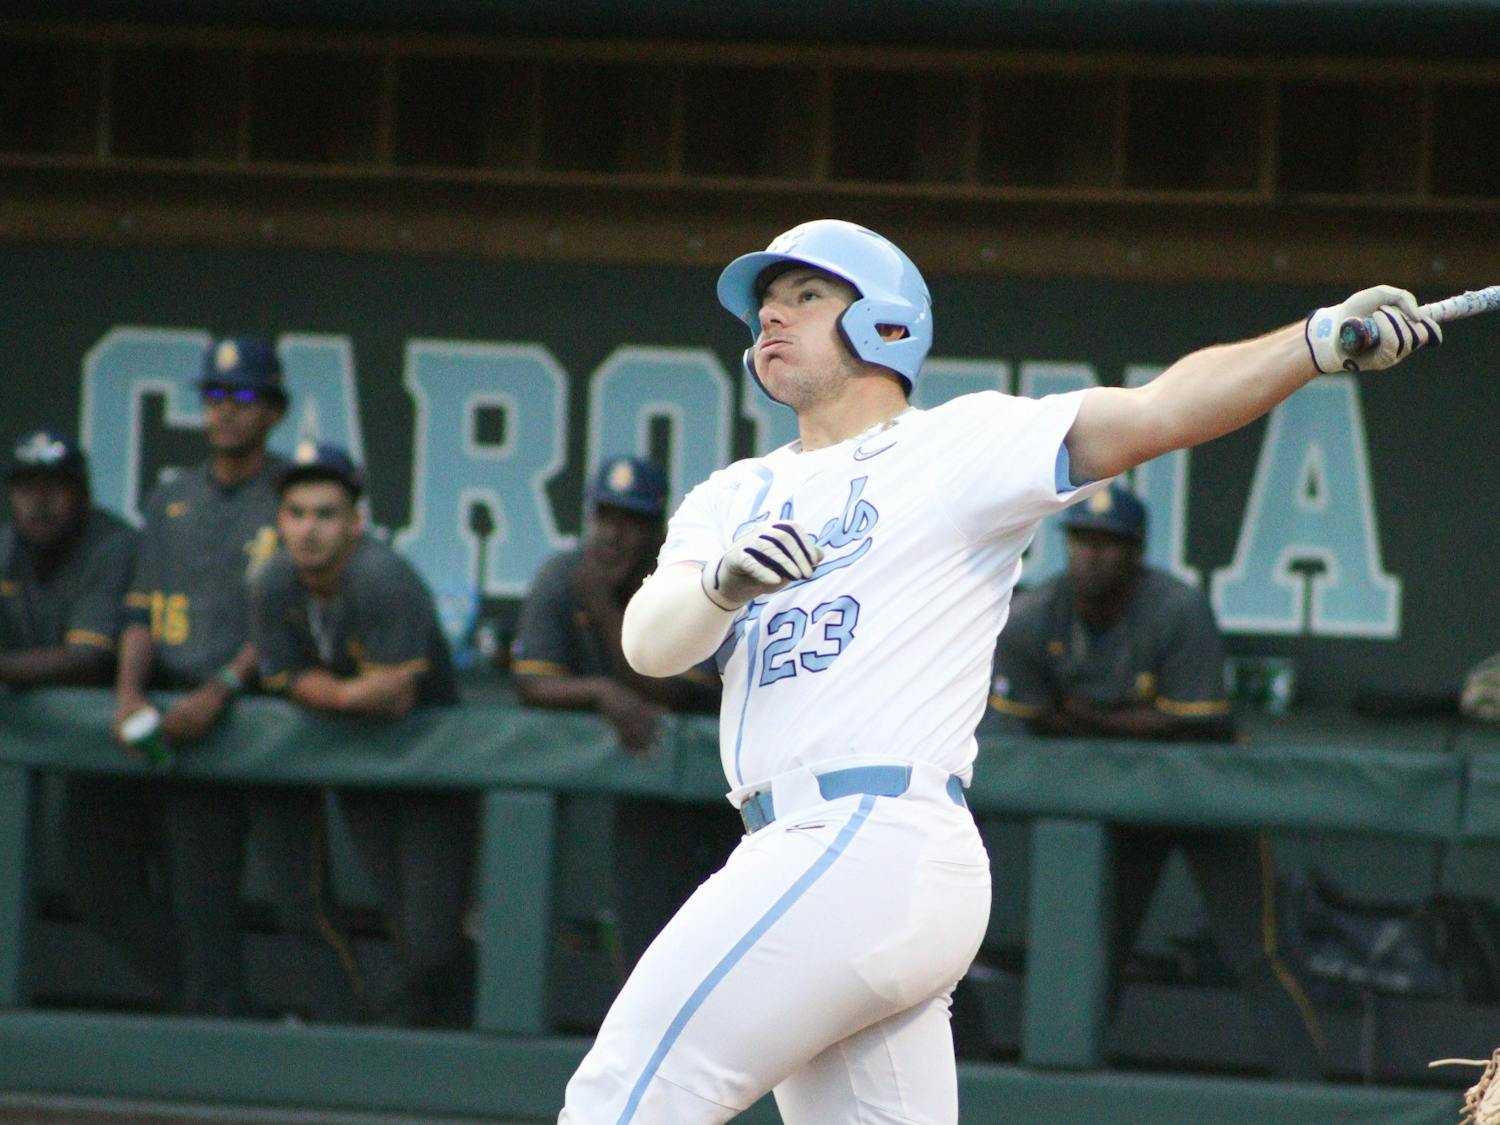 Designated hitter Alberto Osuna (23) hits a foul ball during a baseball game against North Carolina A&T. UNC lost 6-7 at home on Tuesday, April 12, 2022.